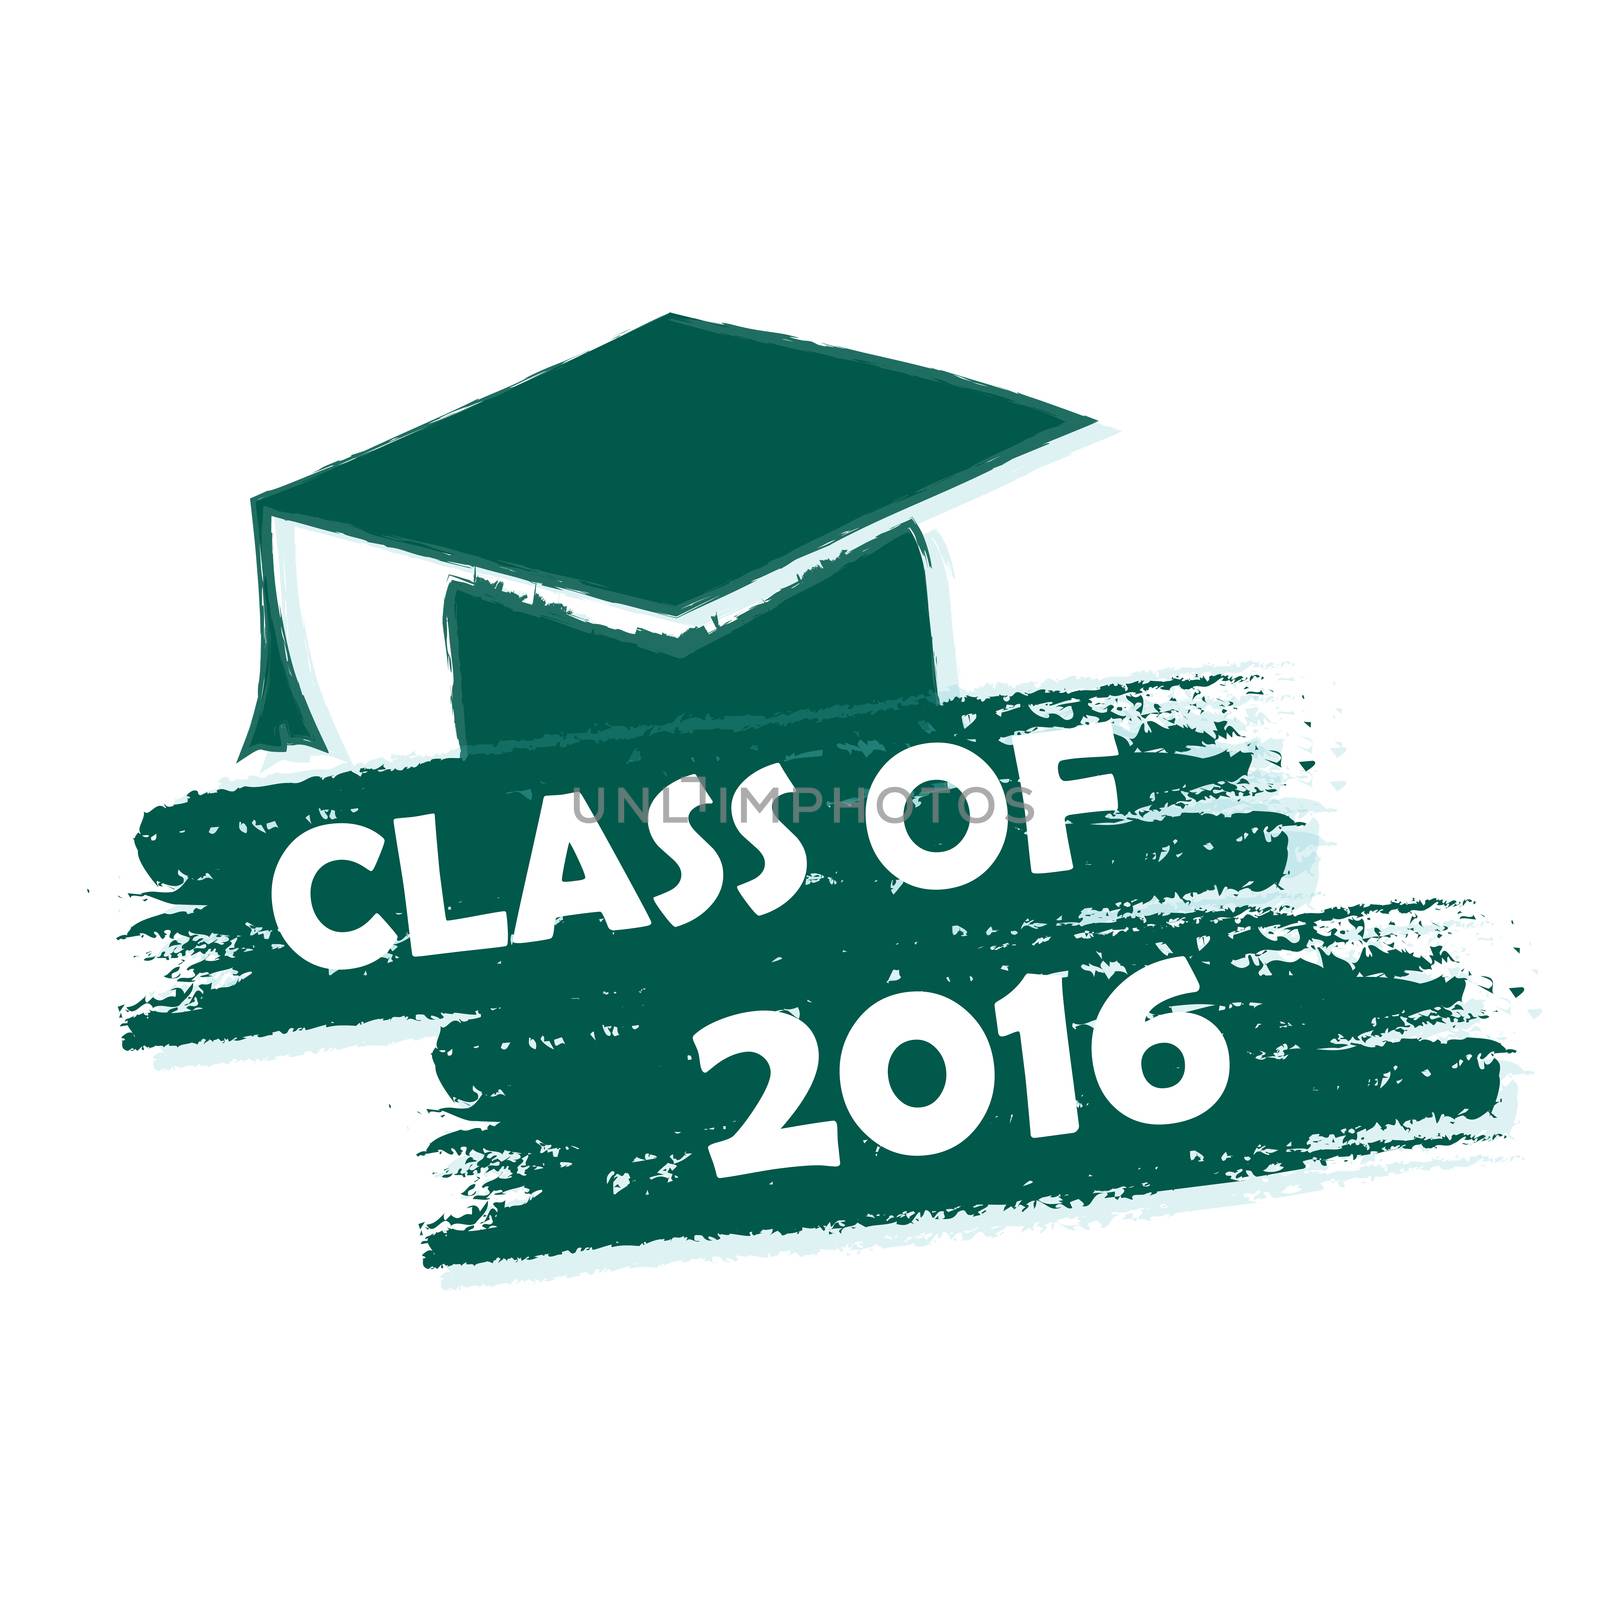 class of 2016 with graduate cap with tassel by marinini